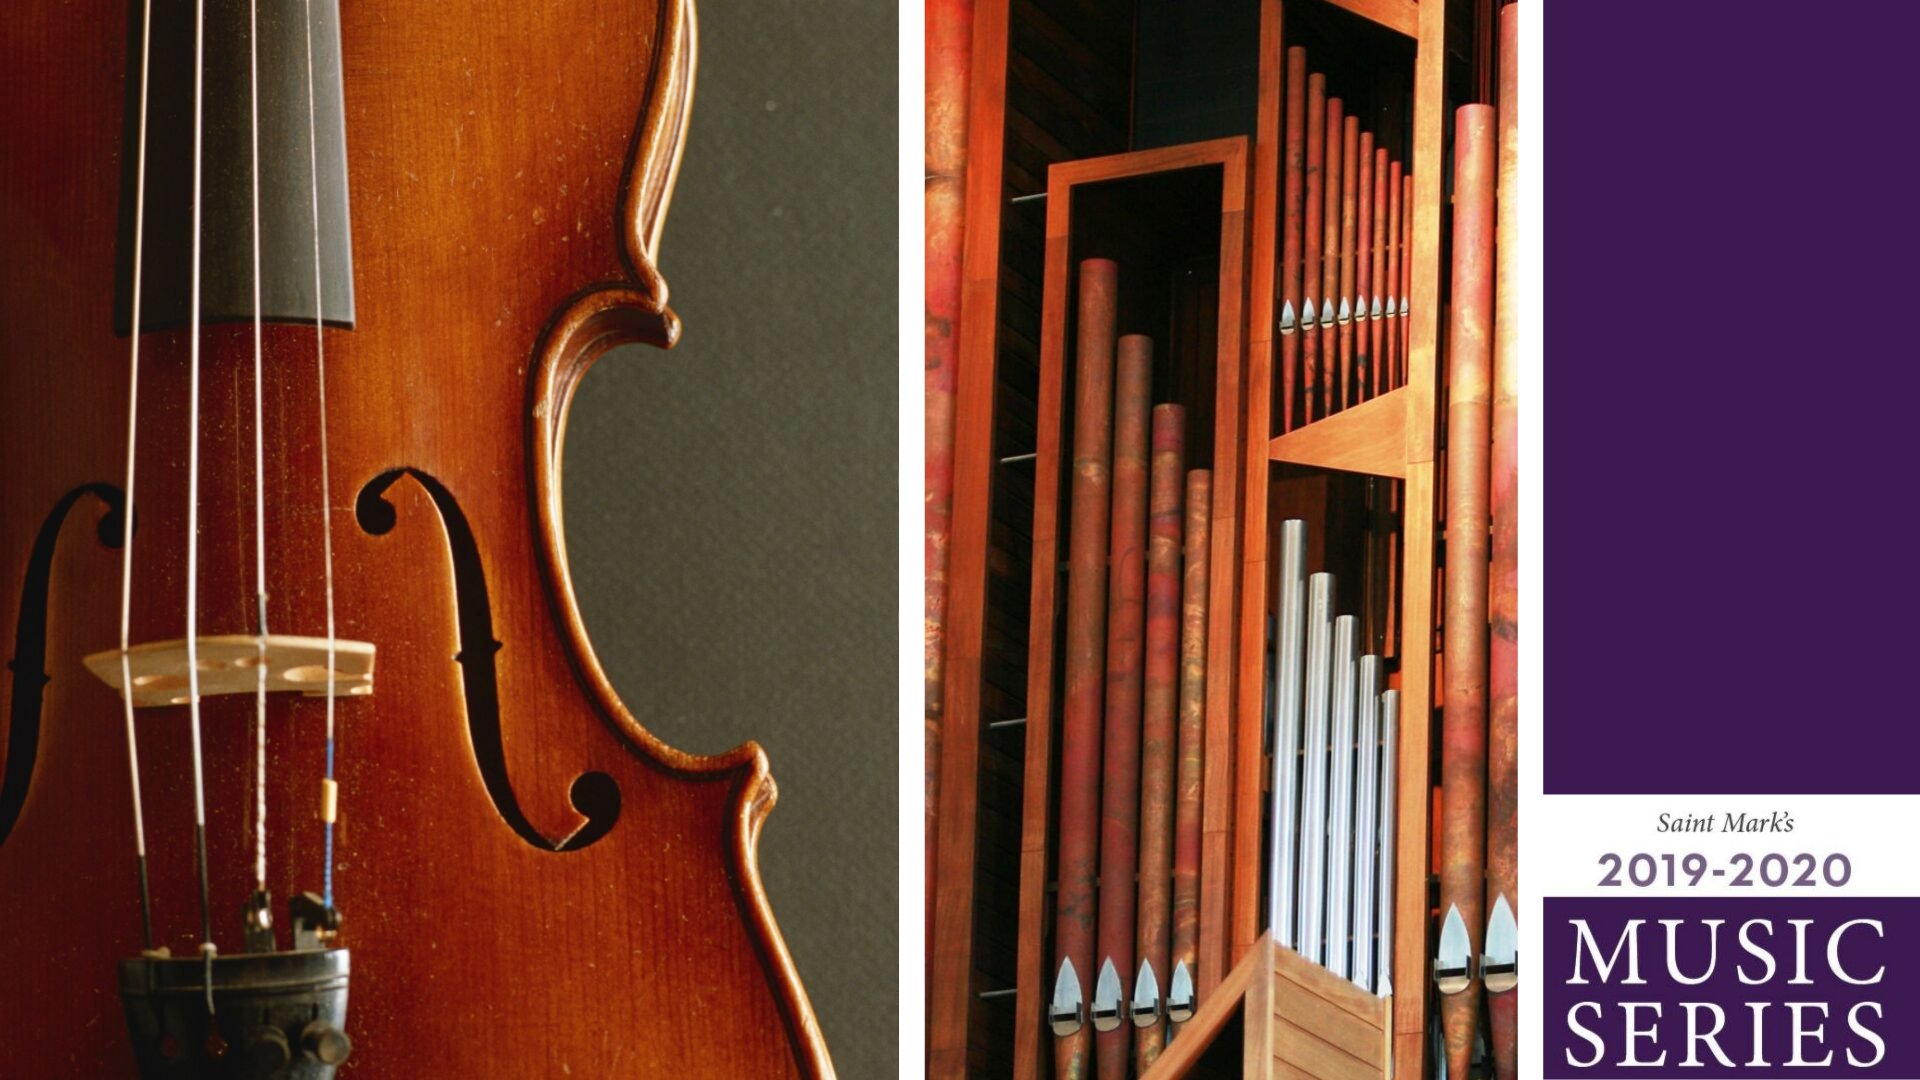 Vehicles for Variation: Beloved Chaconnes for Strings and Organ